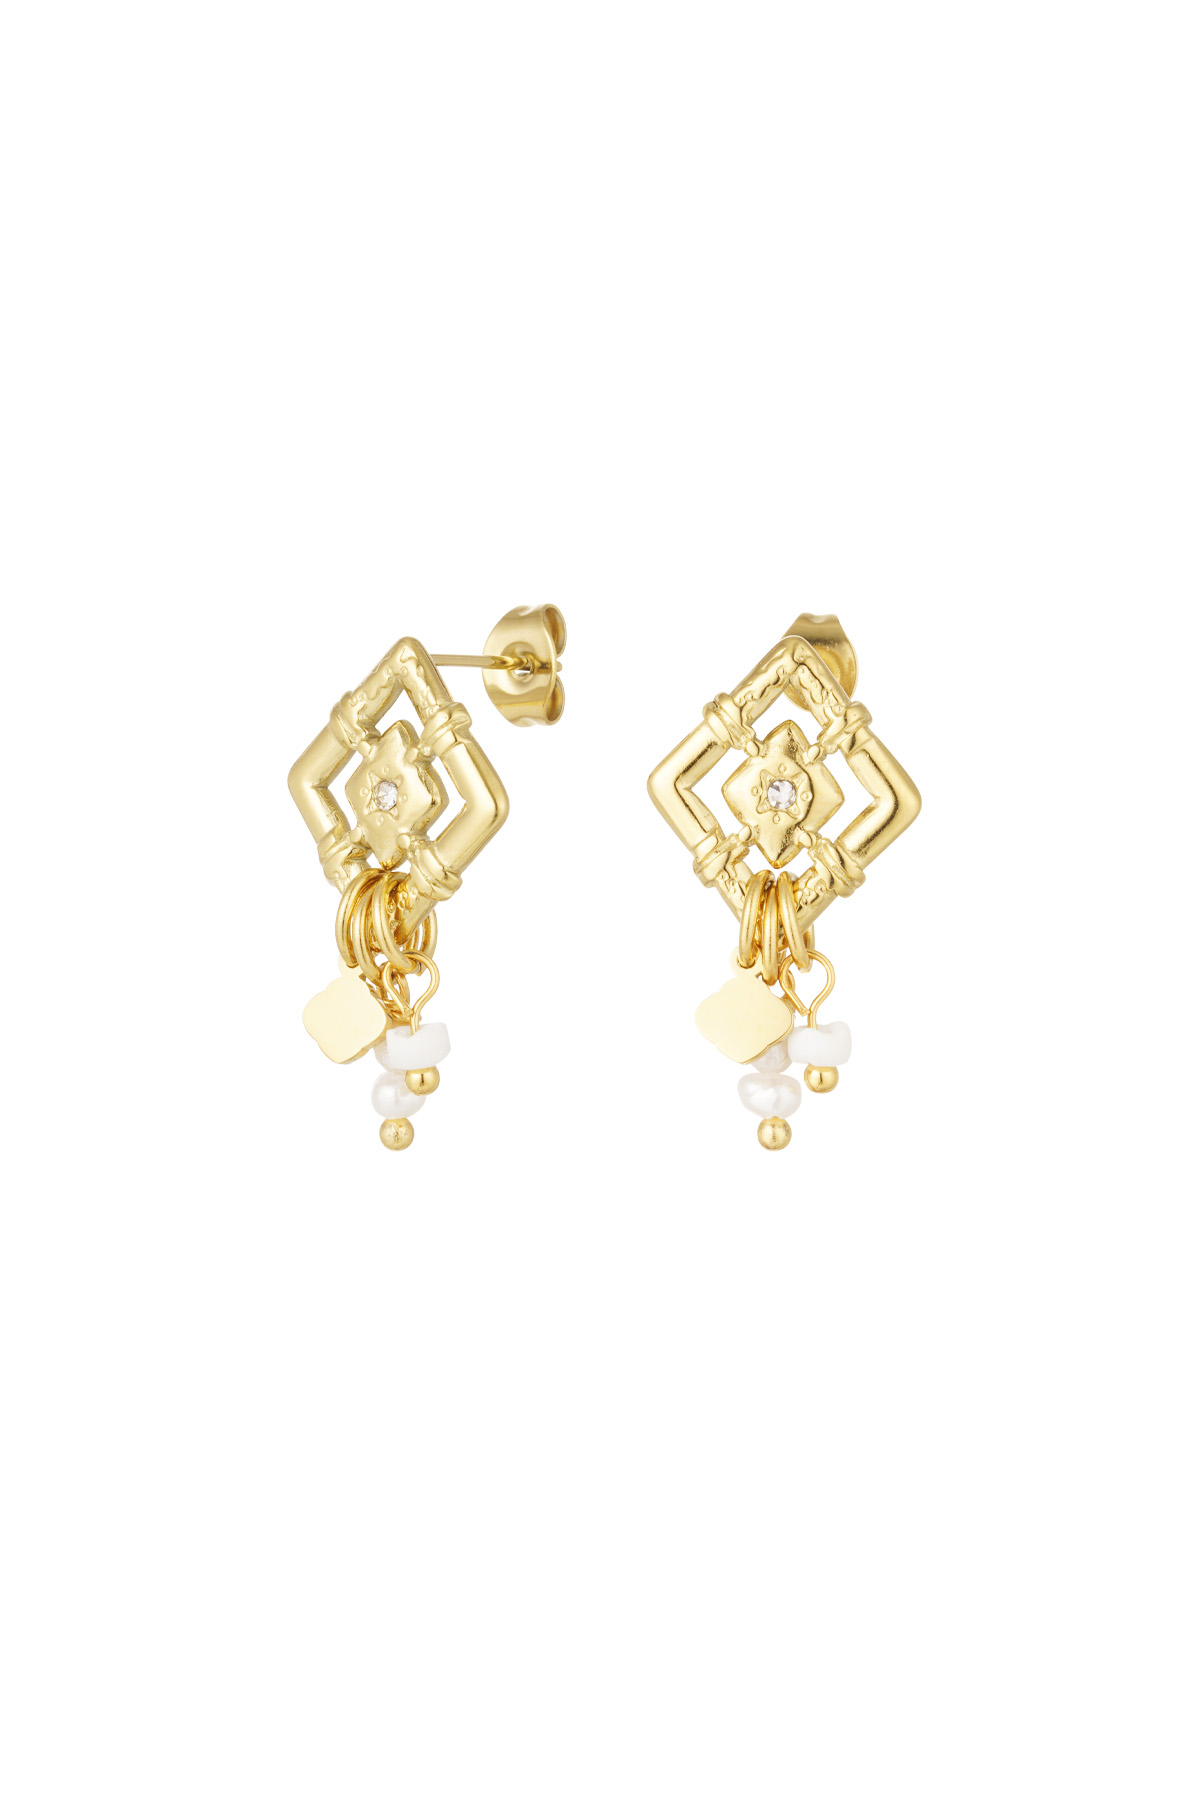 Diamond earrings with beads - gold/white 